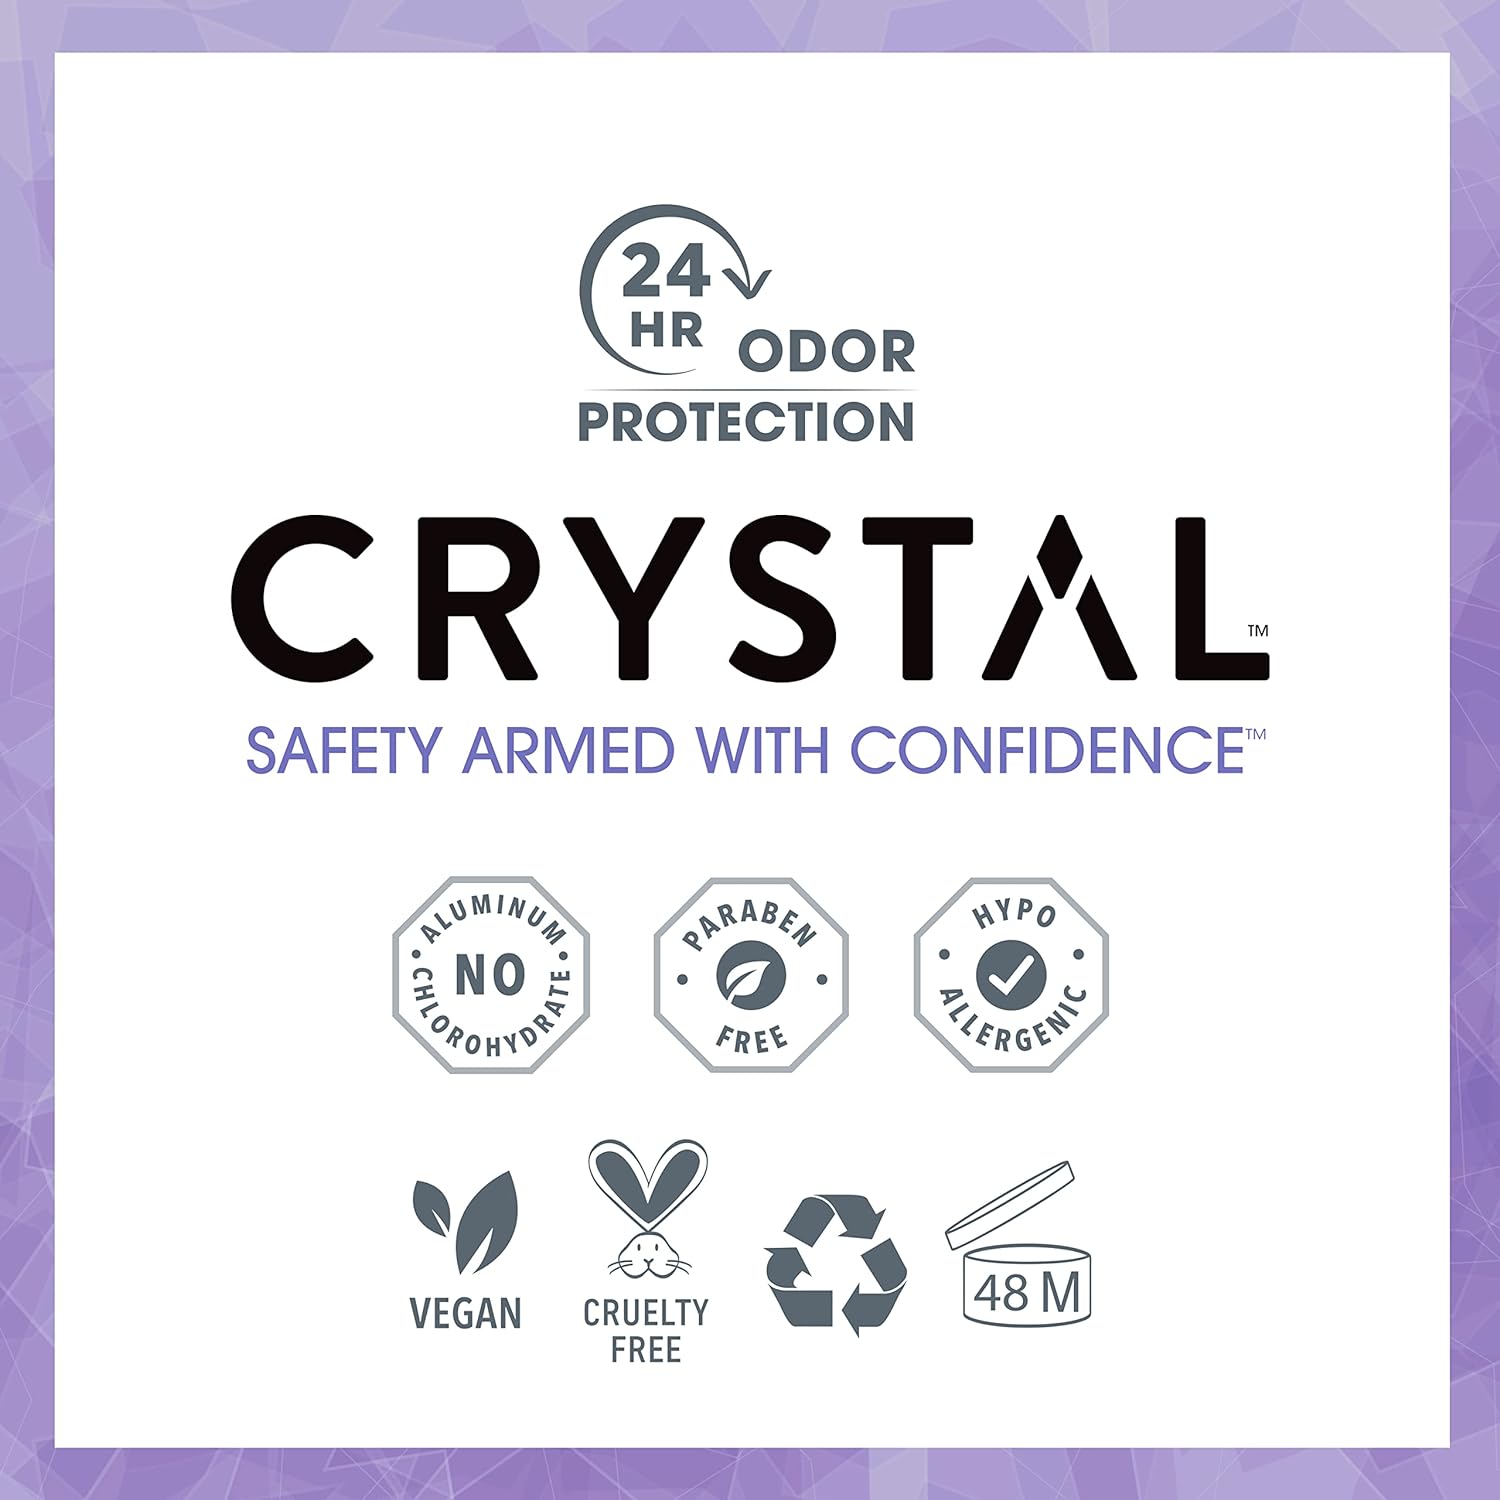 CRYSTAL Deodorant Stick , Unscented, 4.25 Ounce, White - Premium Deodorant Stick from Concordia Style Boutique - Just $10.70! Shop now at Concordia Style Boutique